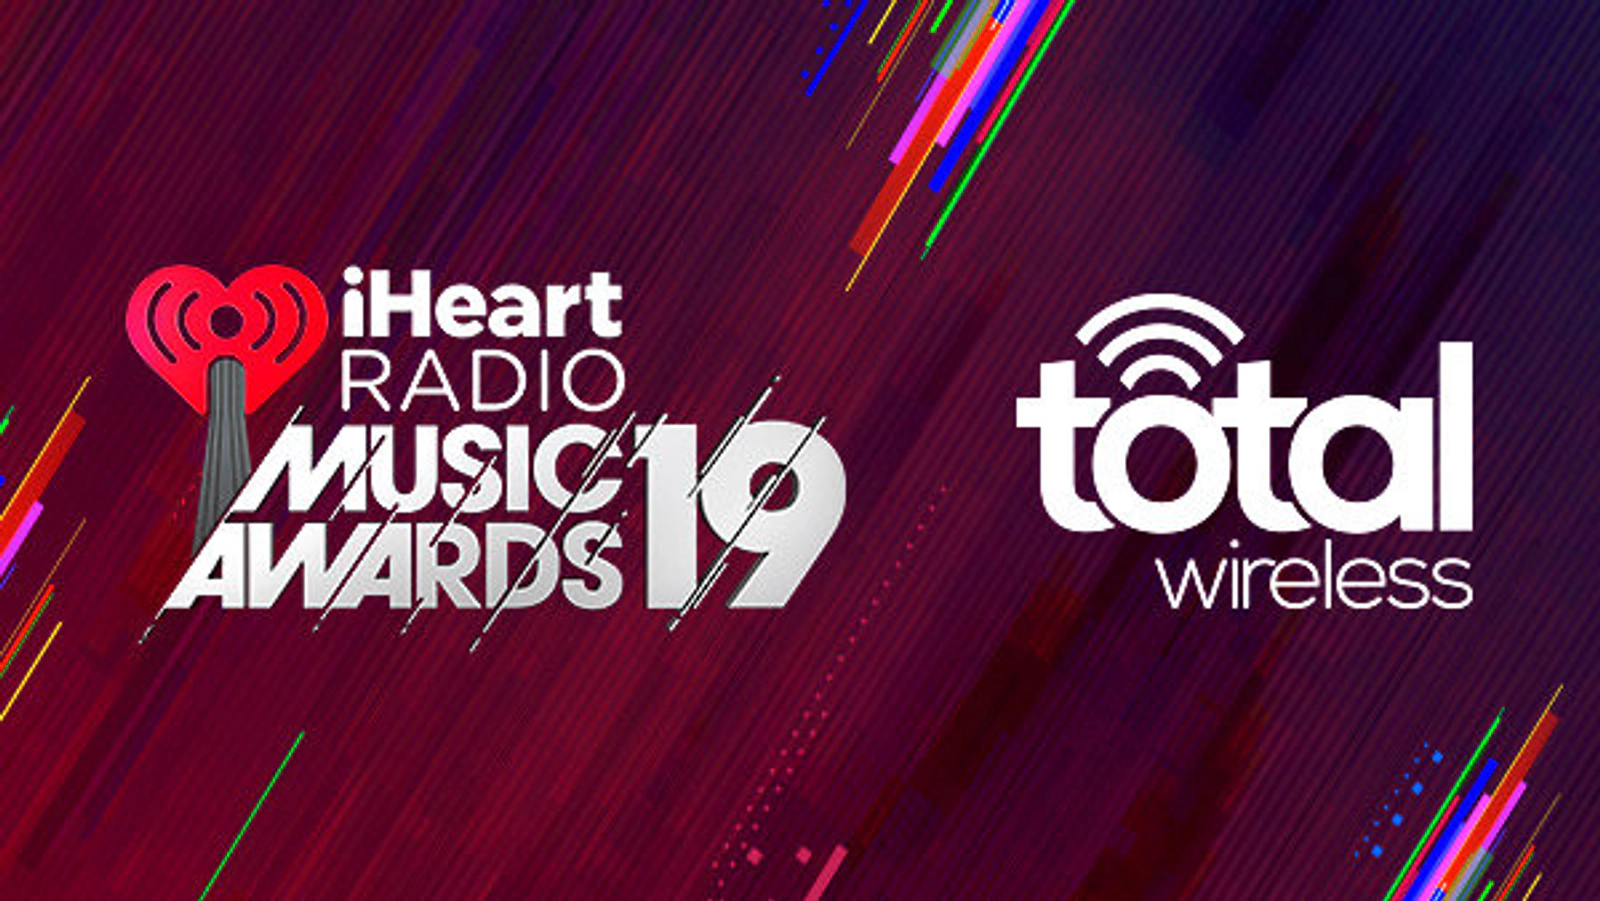     Total Wireless Wants To Send You To Our iHeartRadio Music Awards!     - Thumbnail Image